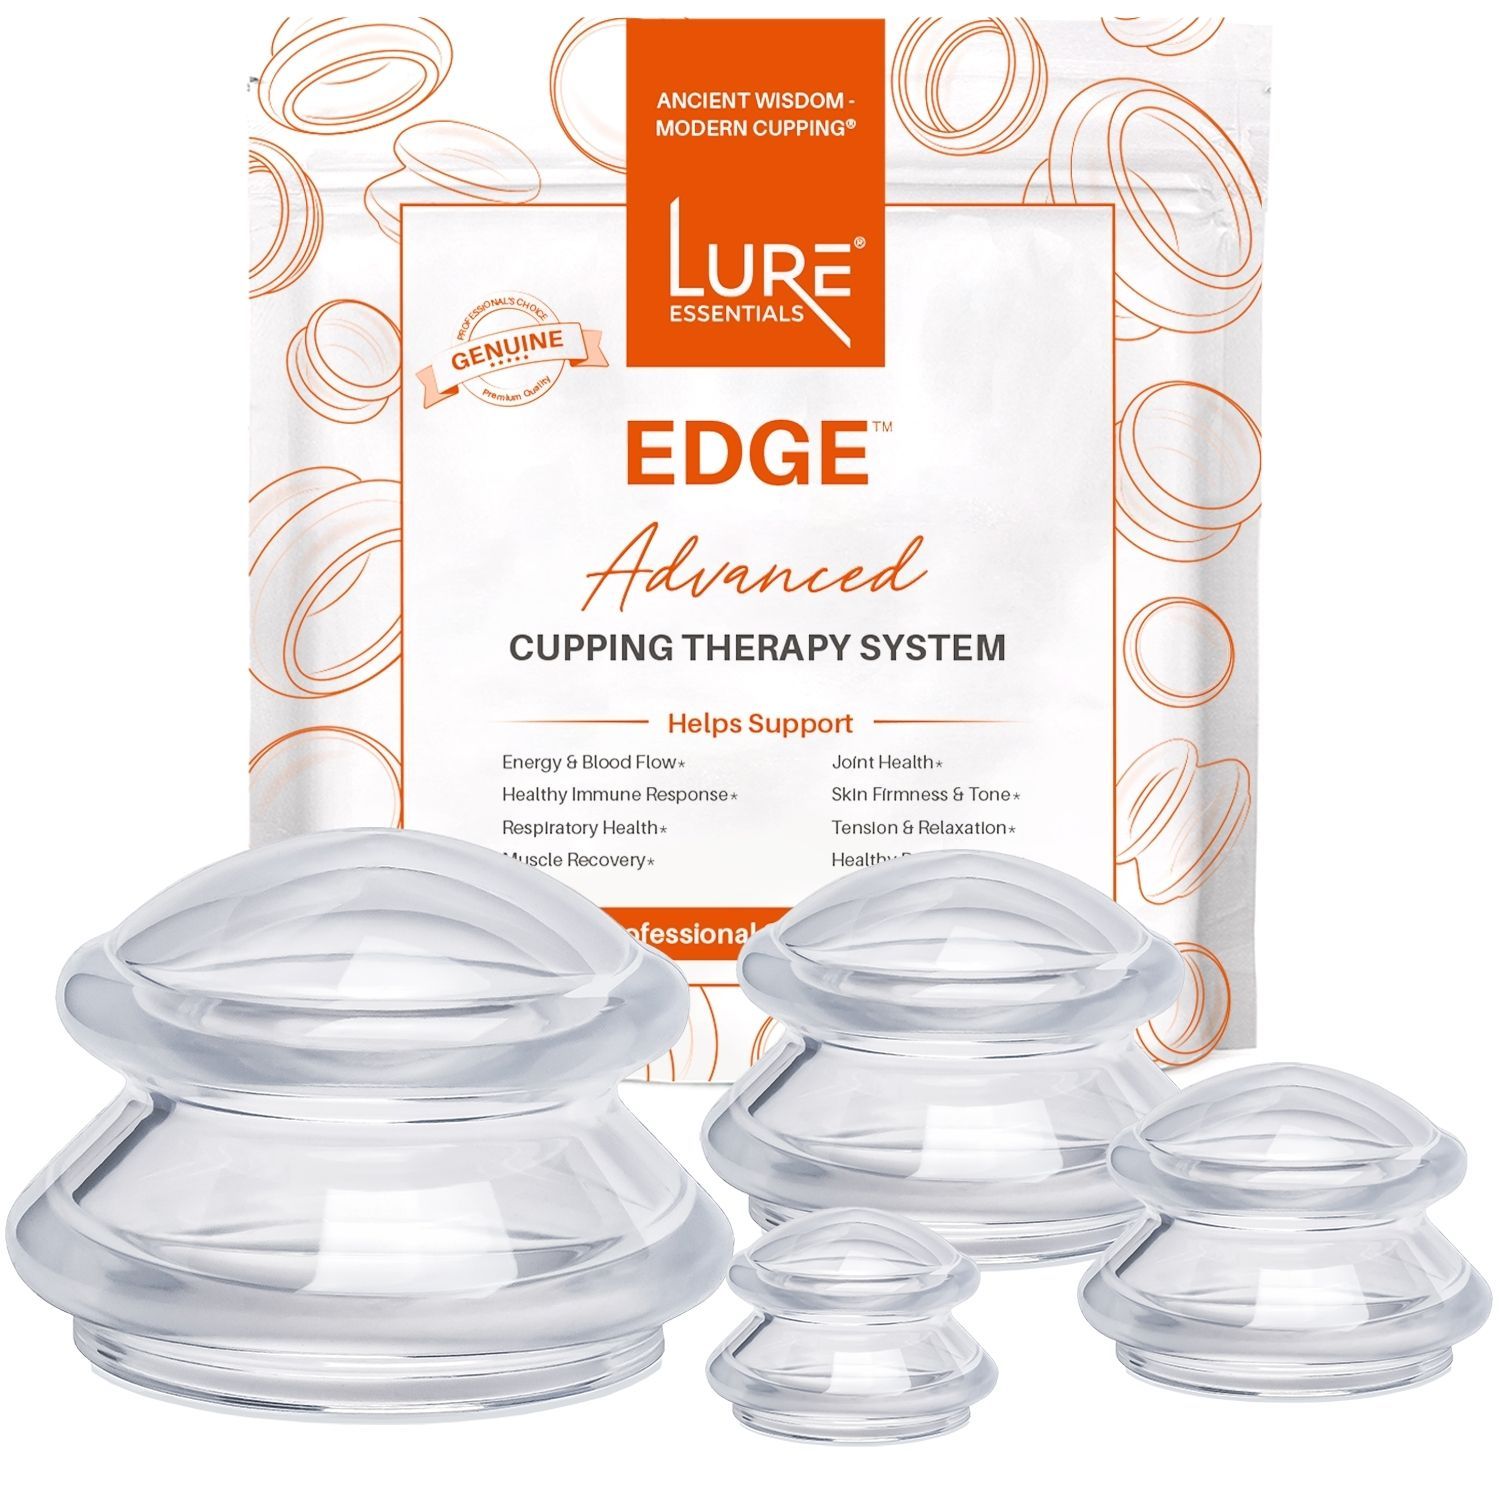 Edge Cupping Set - Clear